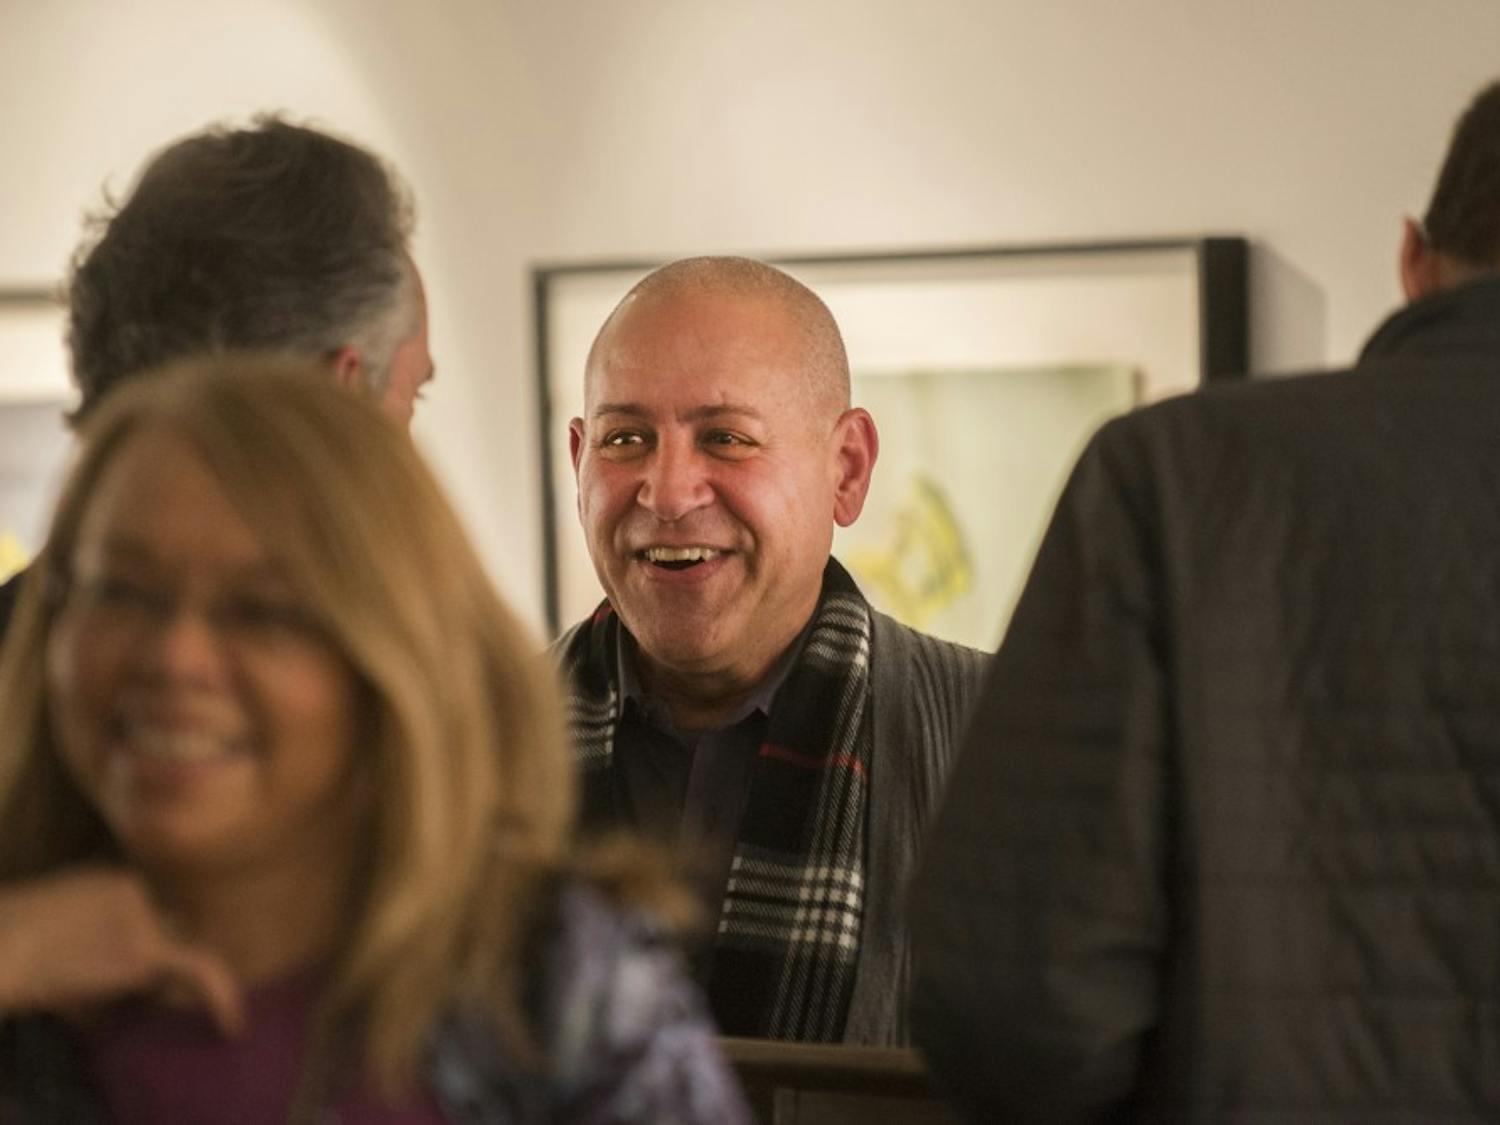 Omar Diaz Liria speaks with attendees after his Cuban art discussion Tuesday, Feb. 9, 2016 at the Tamarind Gallery. Diaz spoke about the evolving artistic and cultural changes Cuba has gone through.